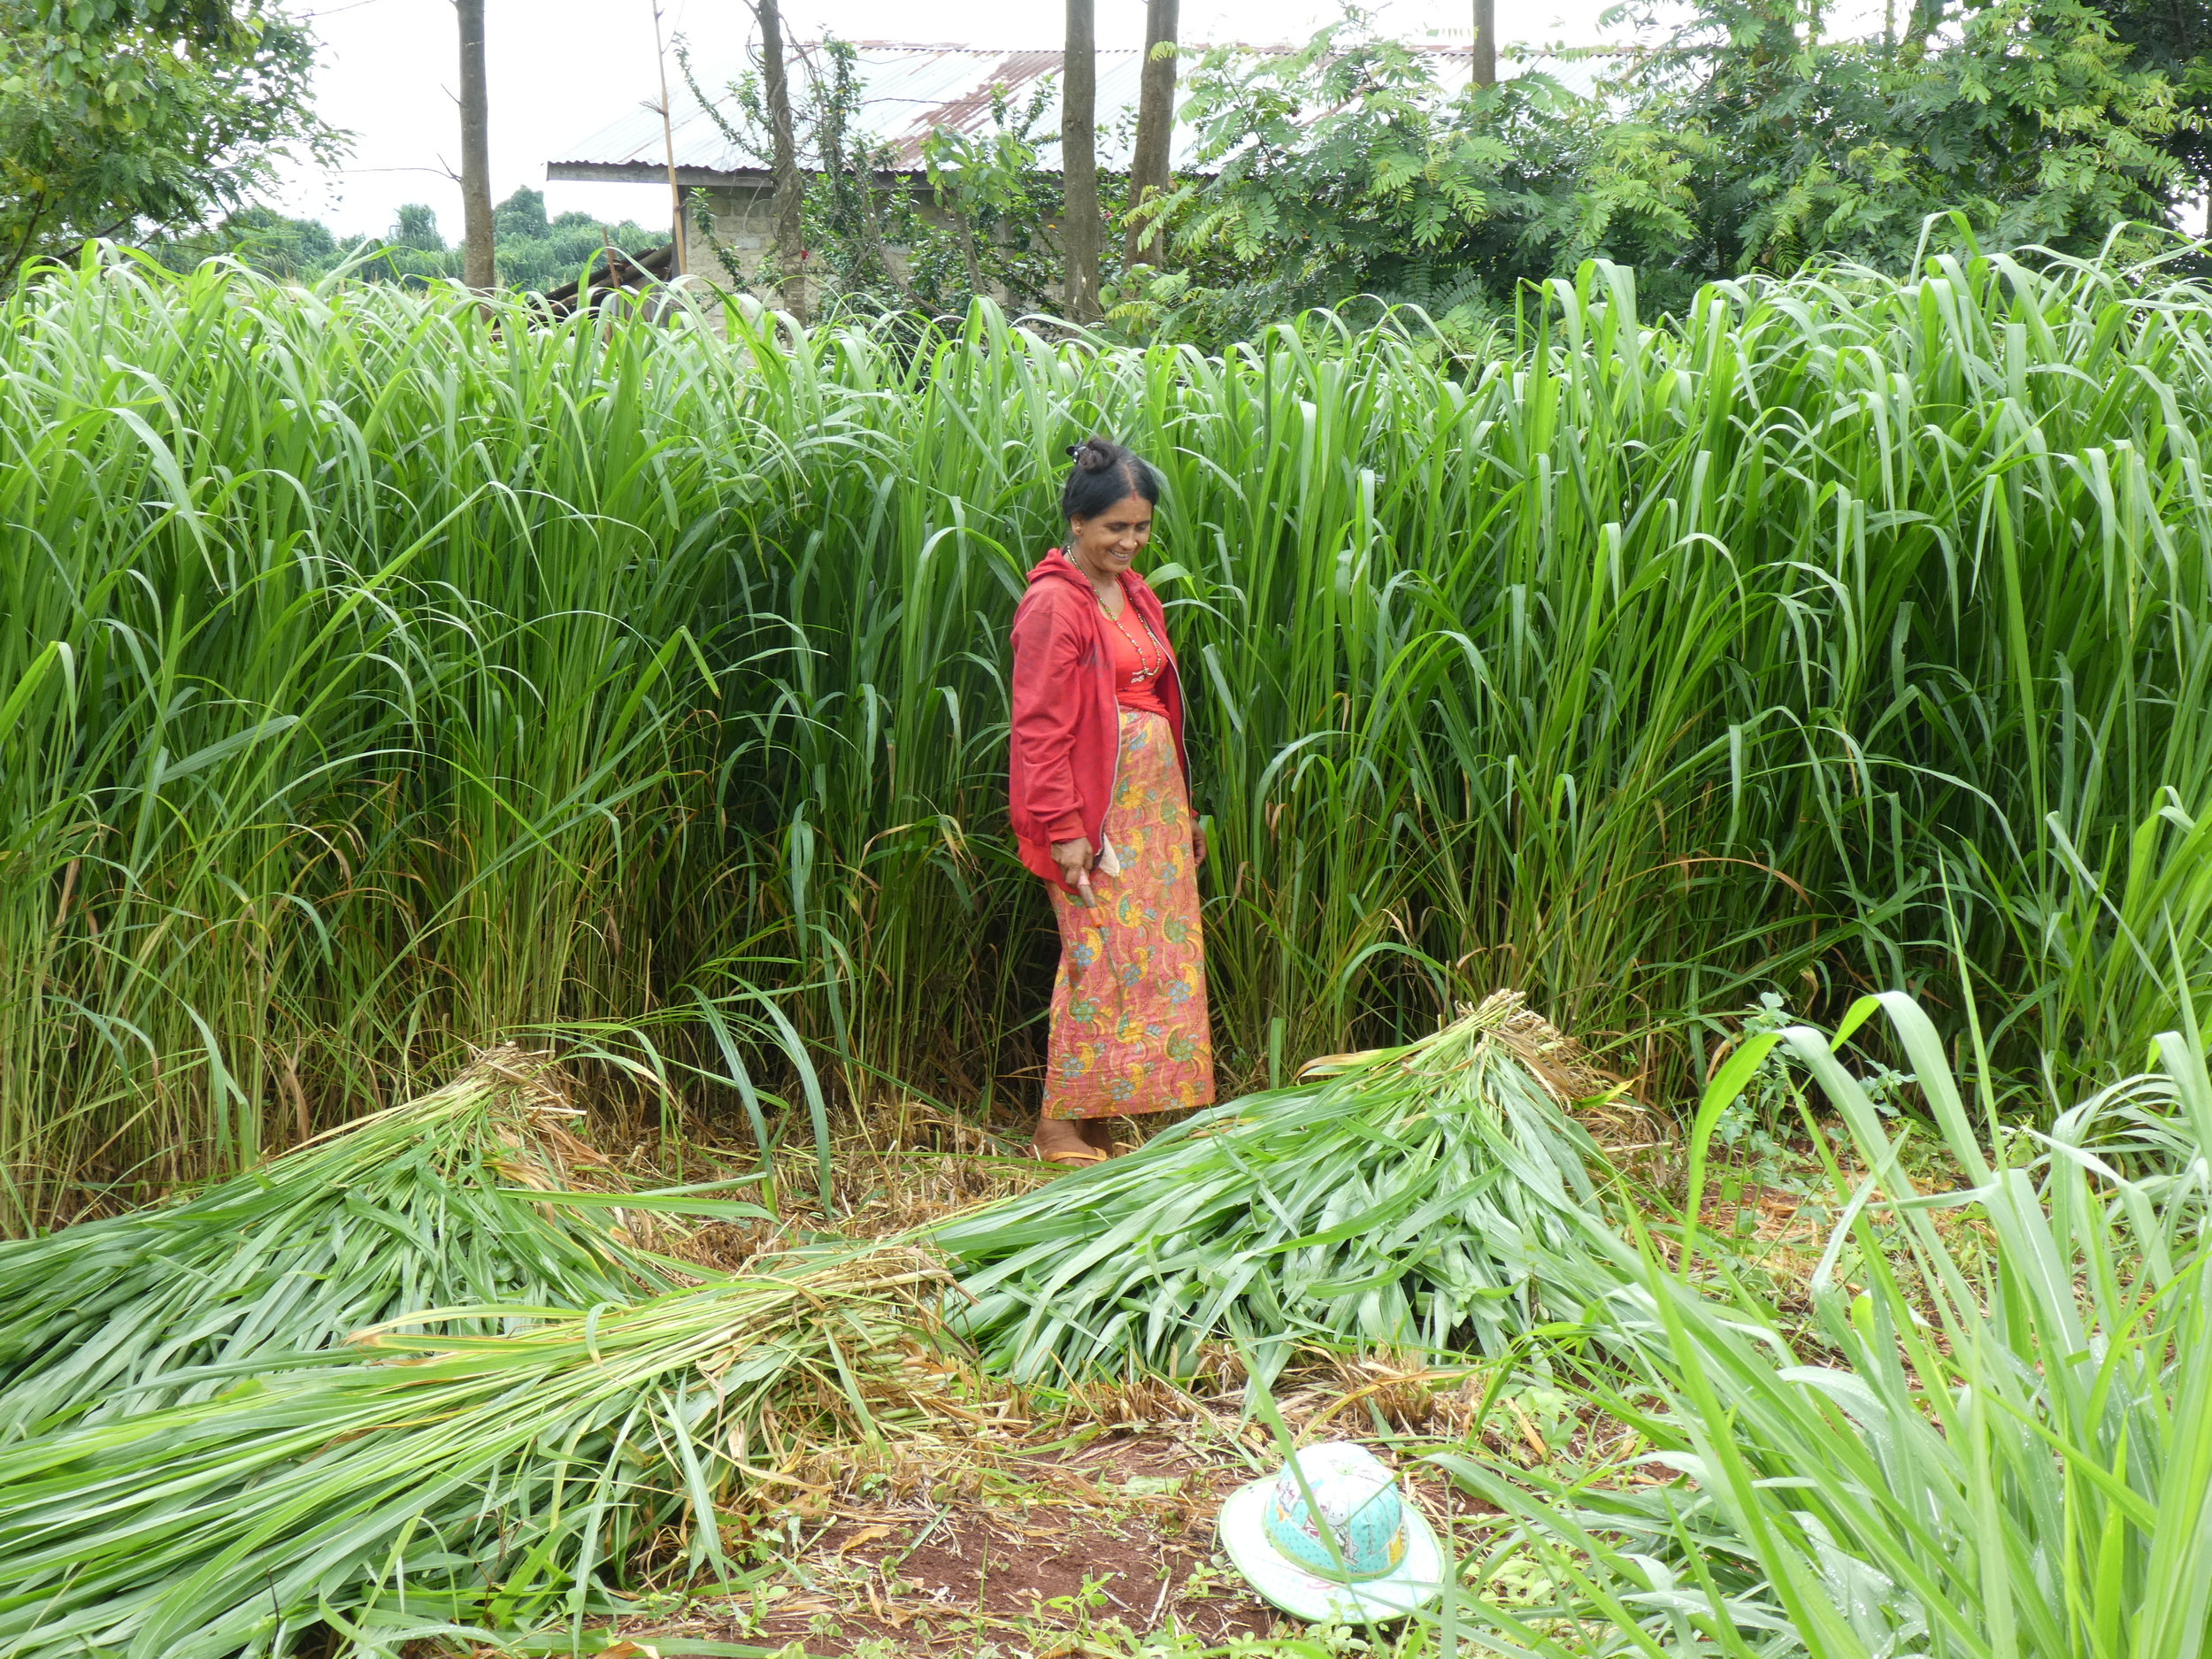 A farmer harvesting her new stand of Mombasa grass